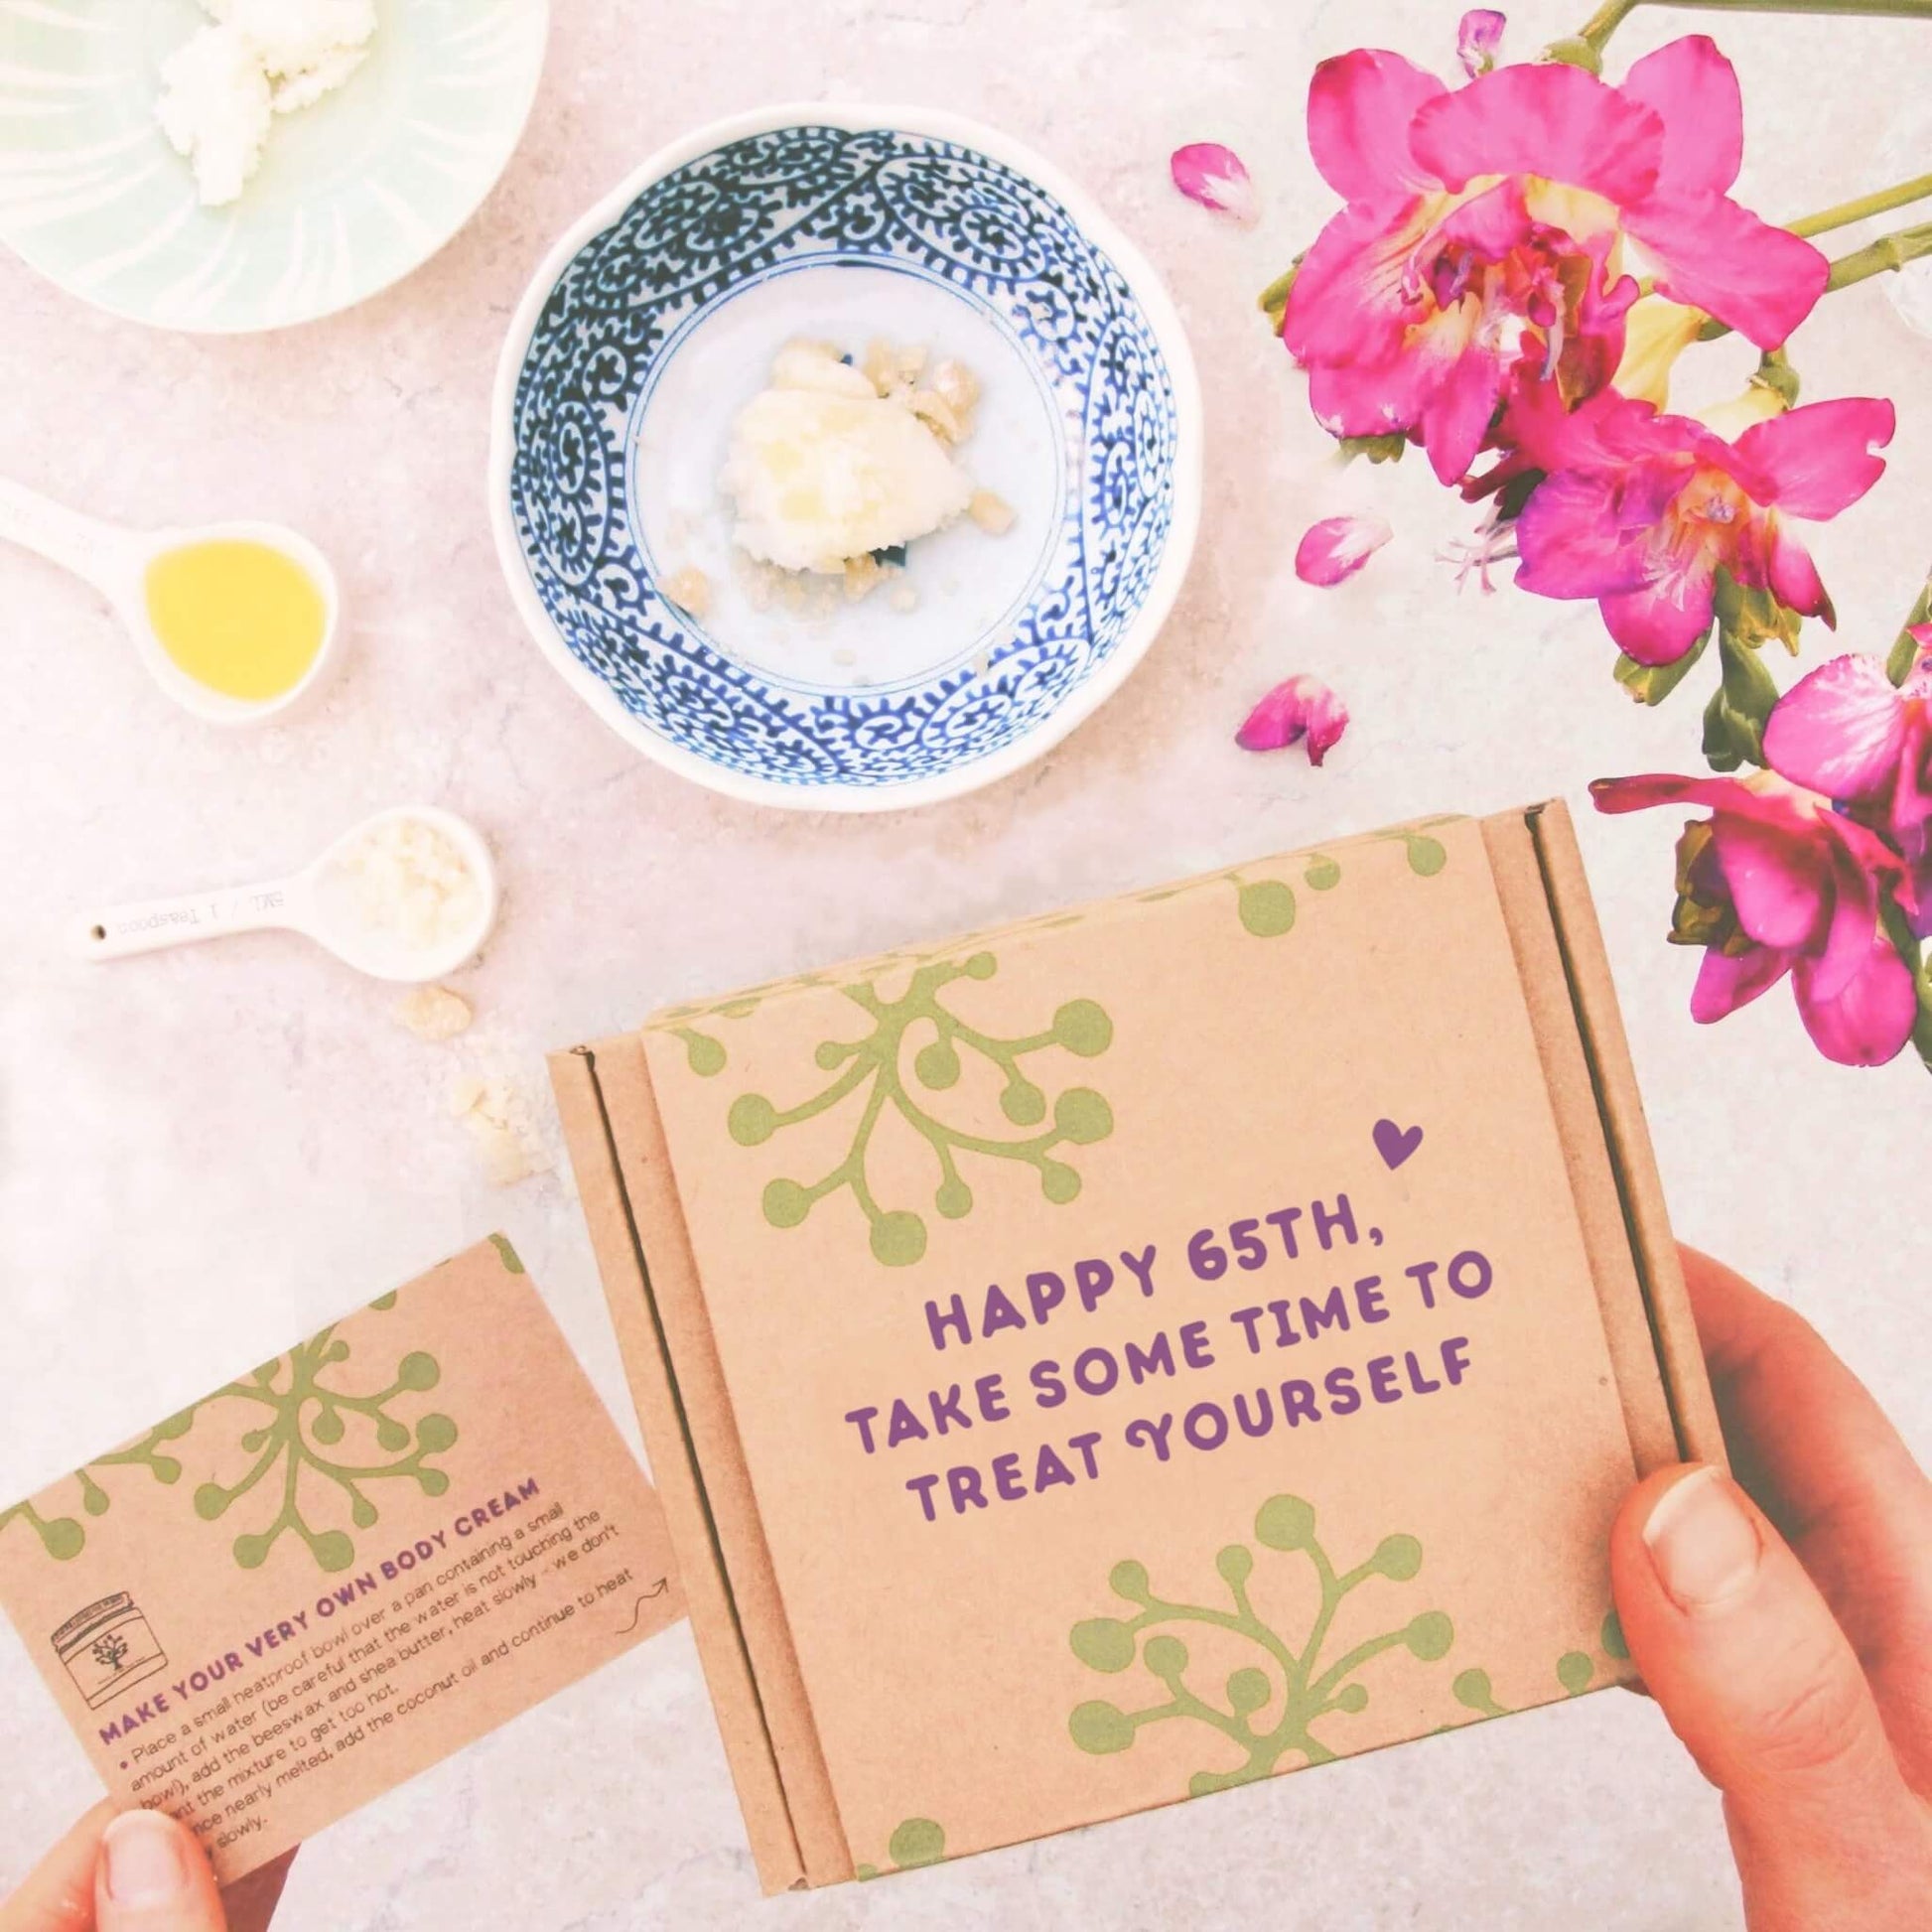 65th birthday gift with birthday gift message 'happy 65th, take some time to treat yourself'